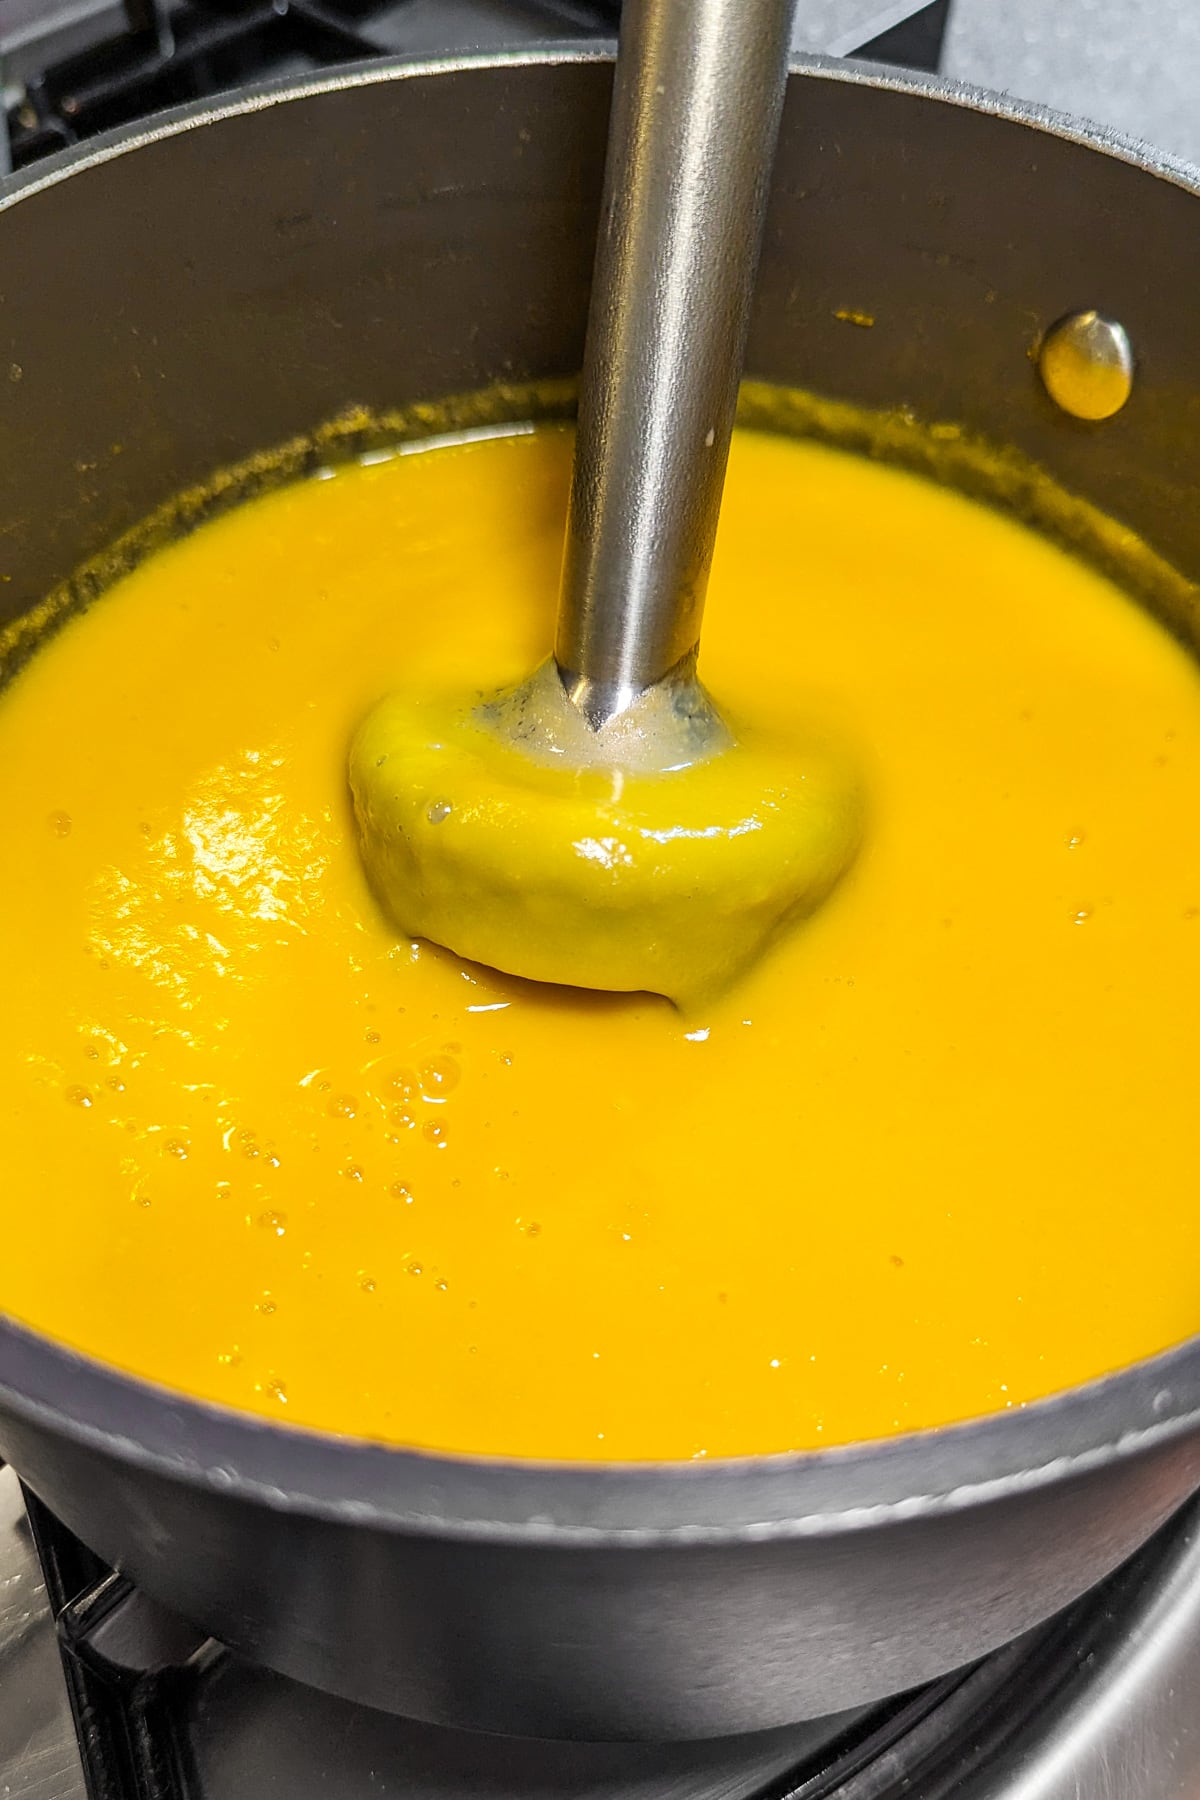 Mixing pumpkin soup with a manual blender in a pan on the stove.